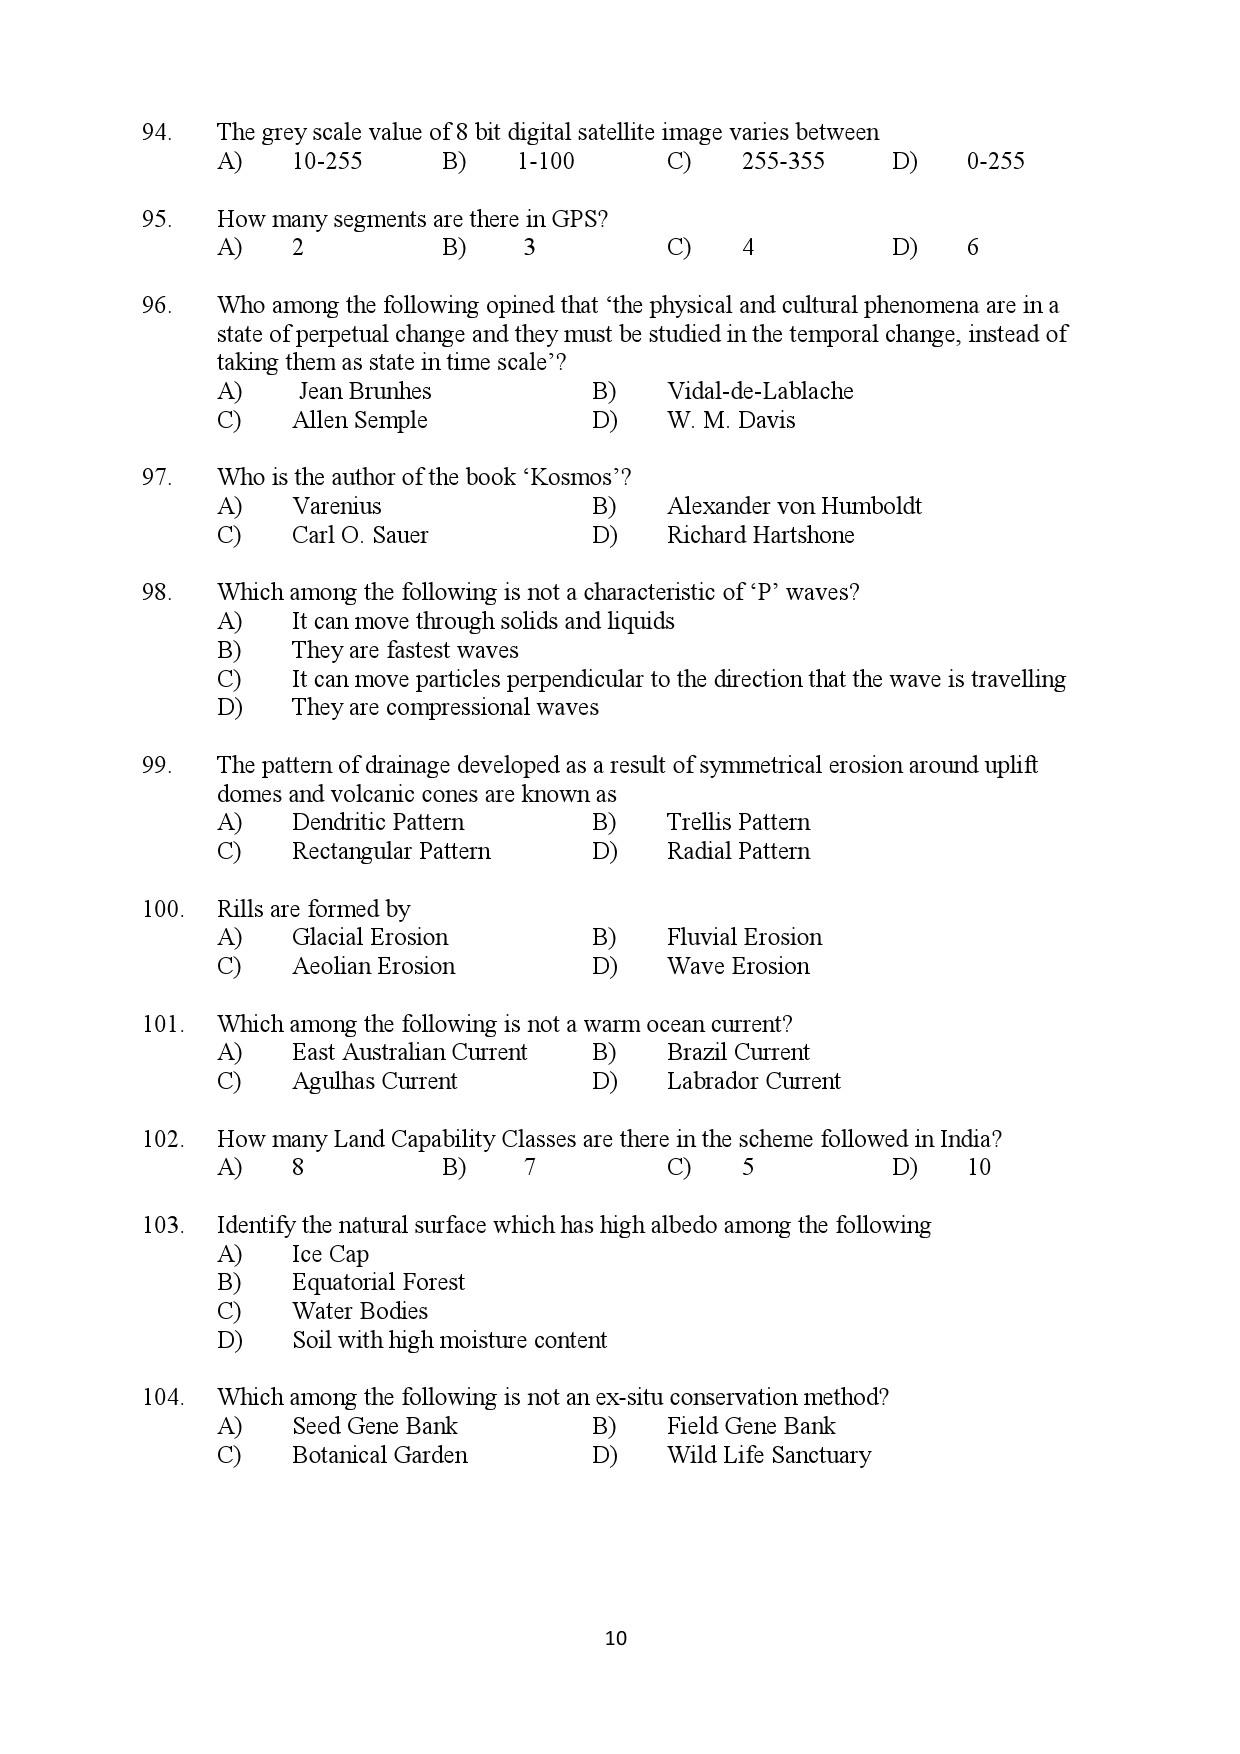 Kerala SET Geography Exam Question Paper July 2019 10